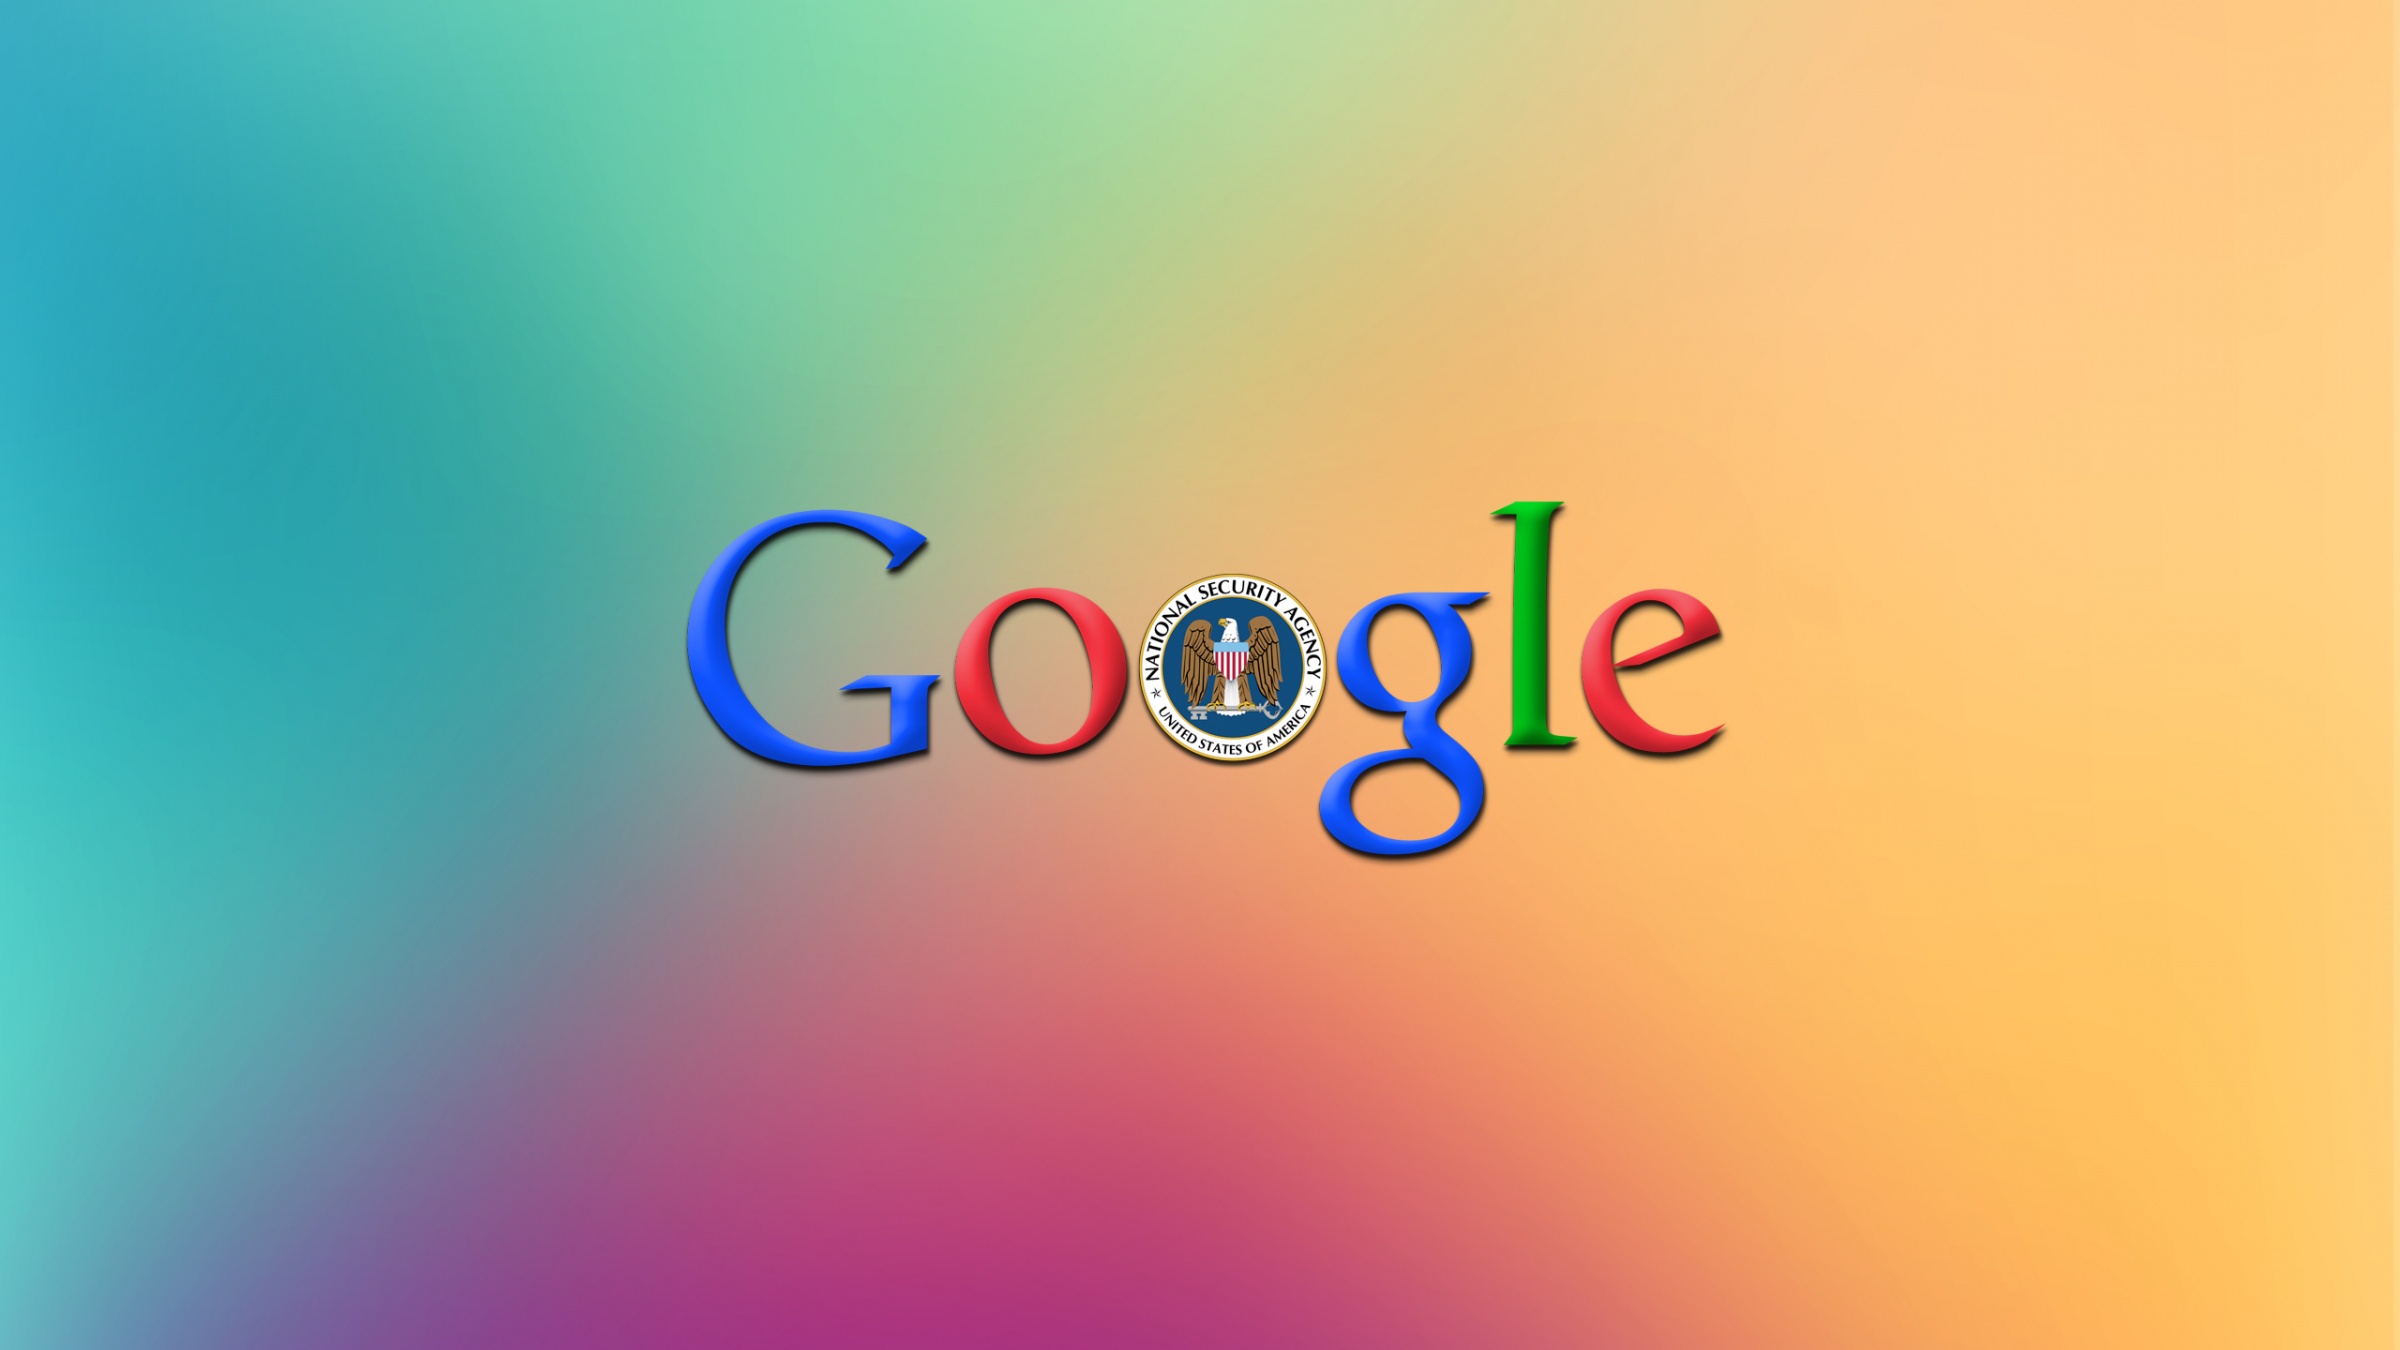 Google Colorful Background